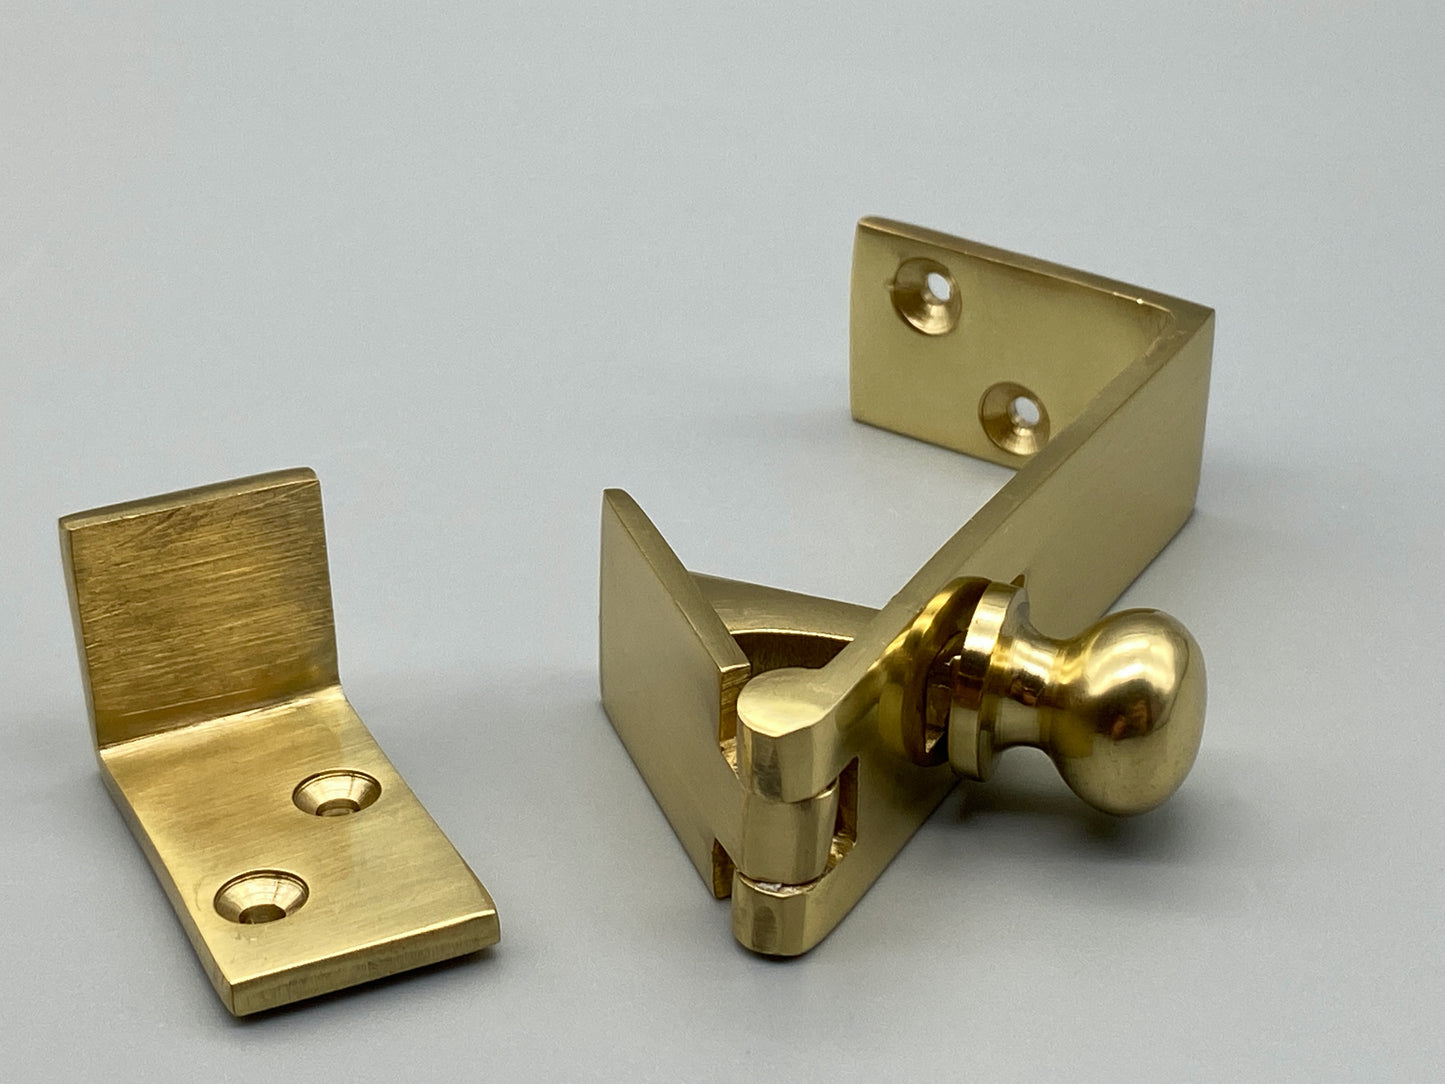 Solid Brass Counterflap Catch - 83mm